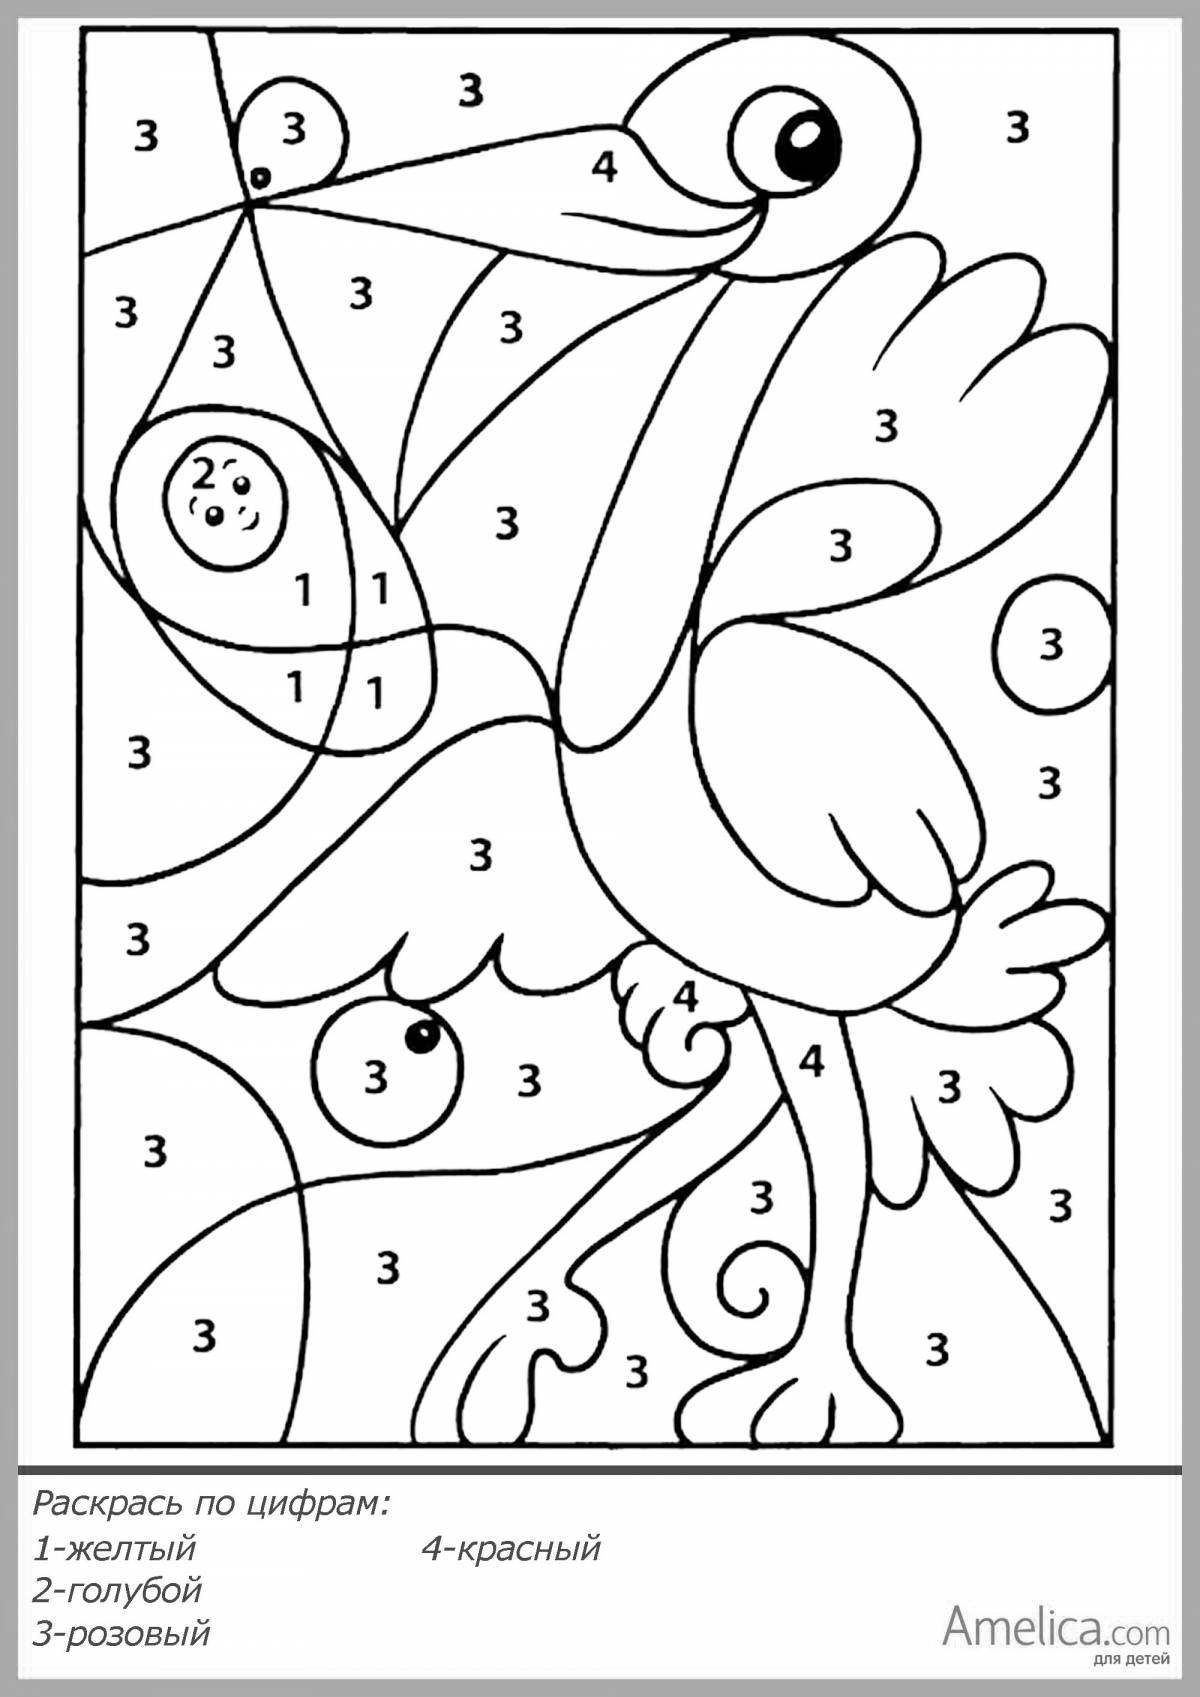 Stimulating coloring by numbers for children 5-7 years old